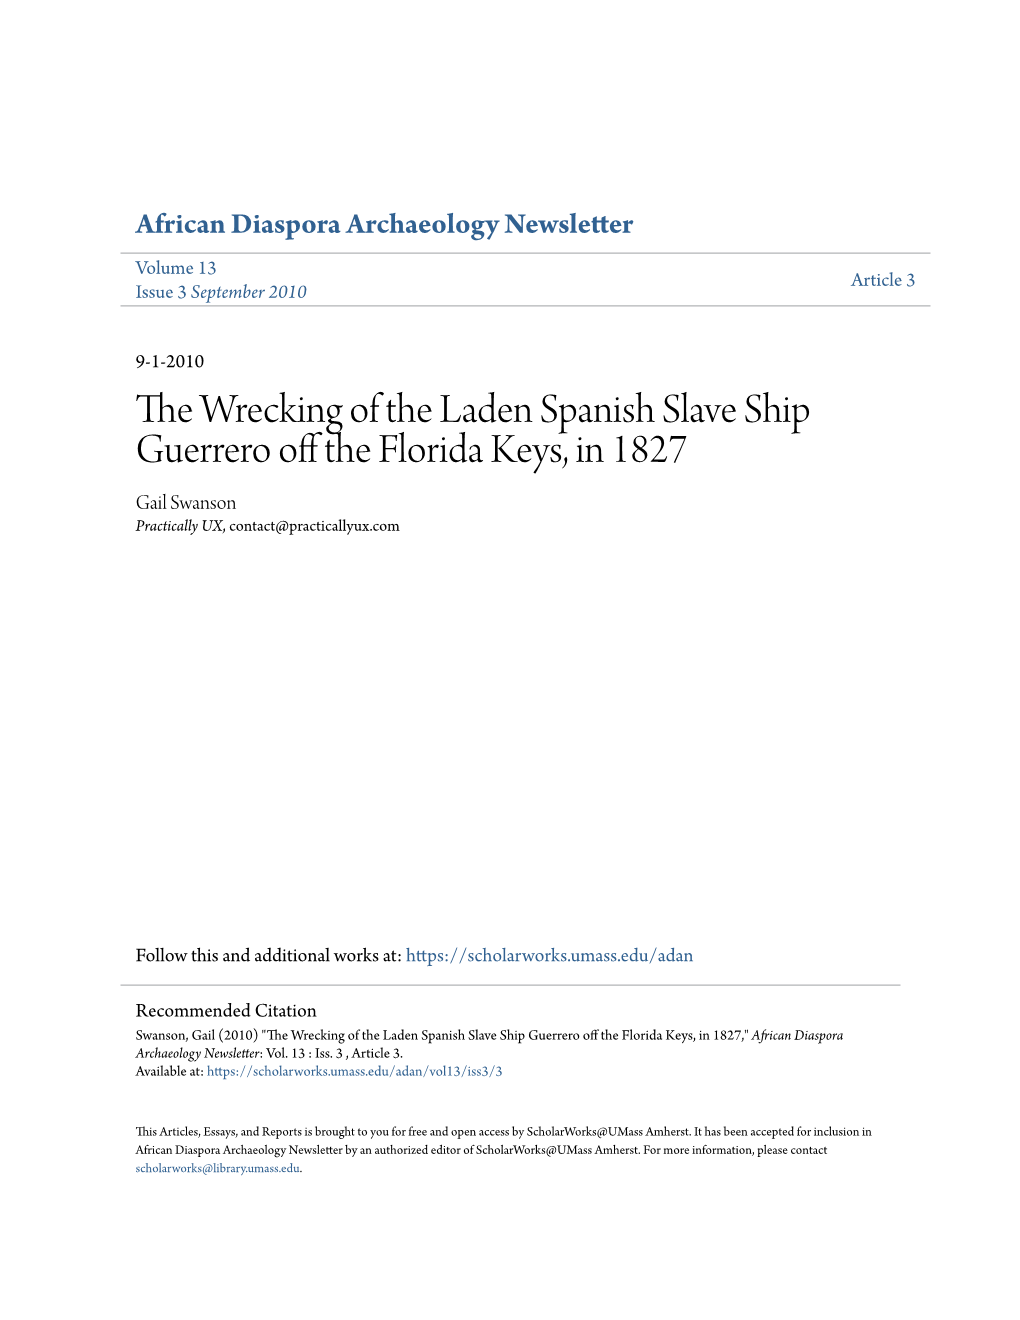 The Wrecking of the Laden Spanish Slave Ship Guerrero Off the Florida Keys, in 1827